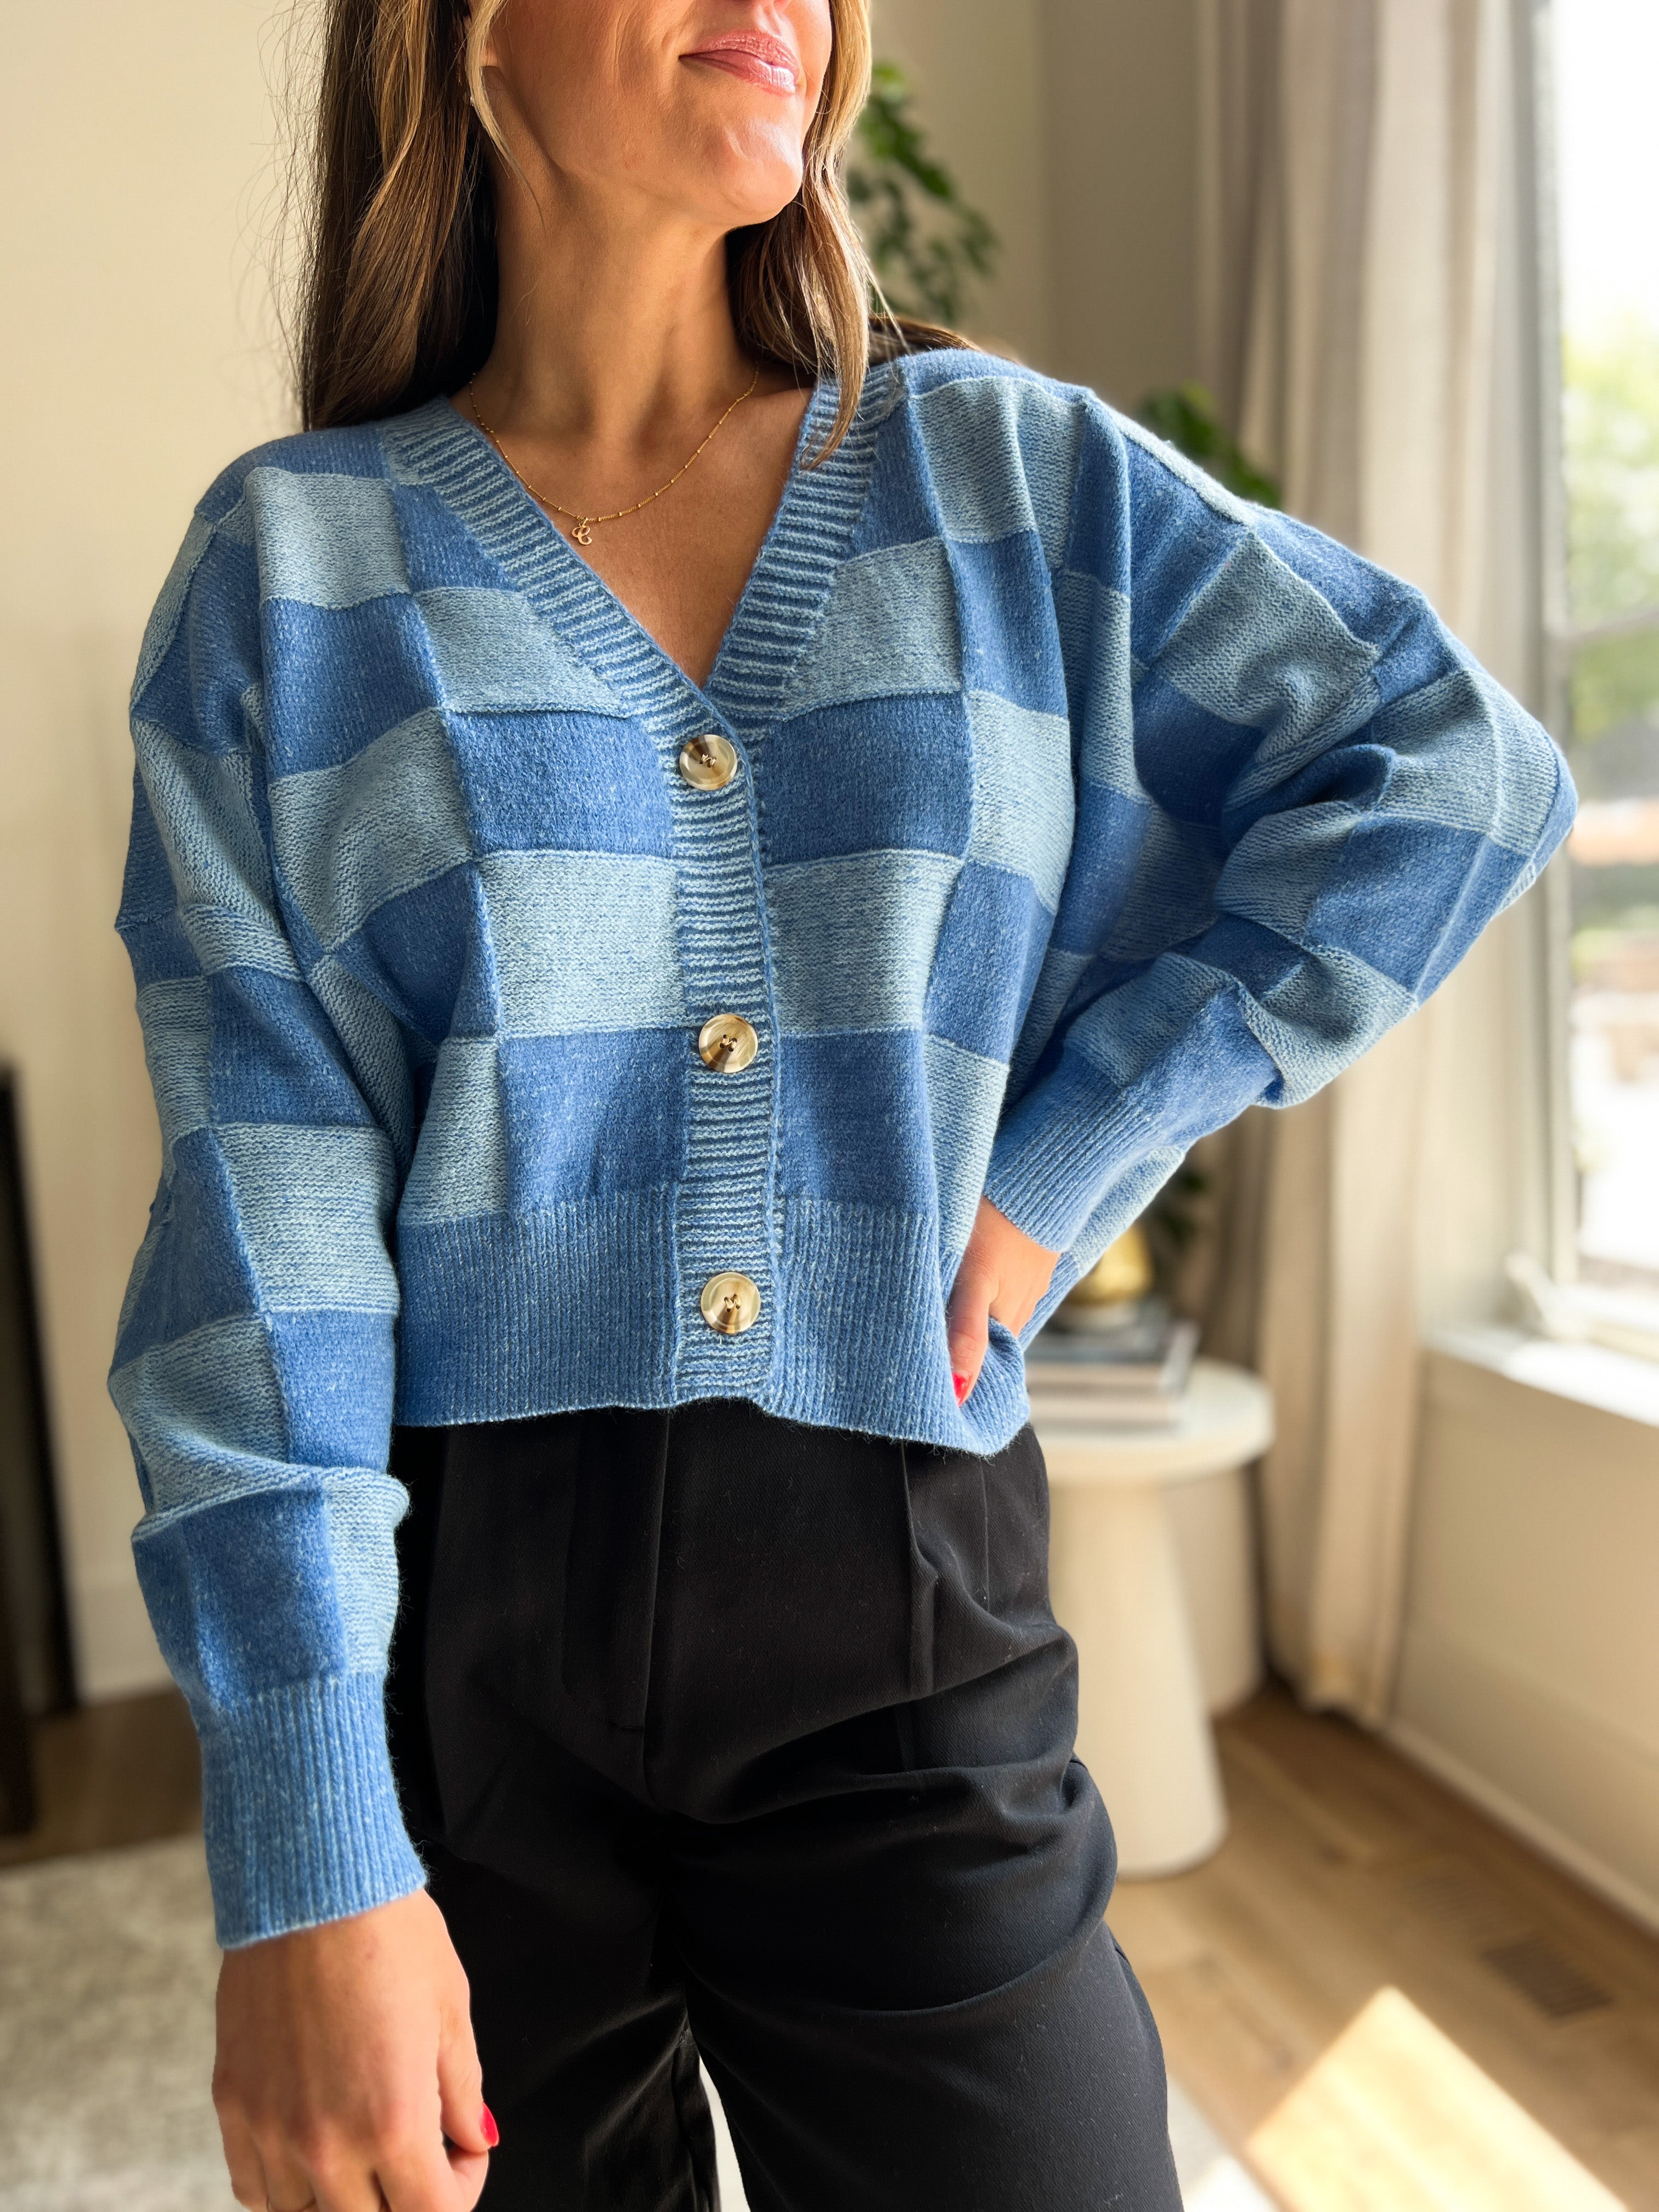 The Blue Checkered Cardigan